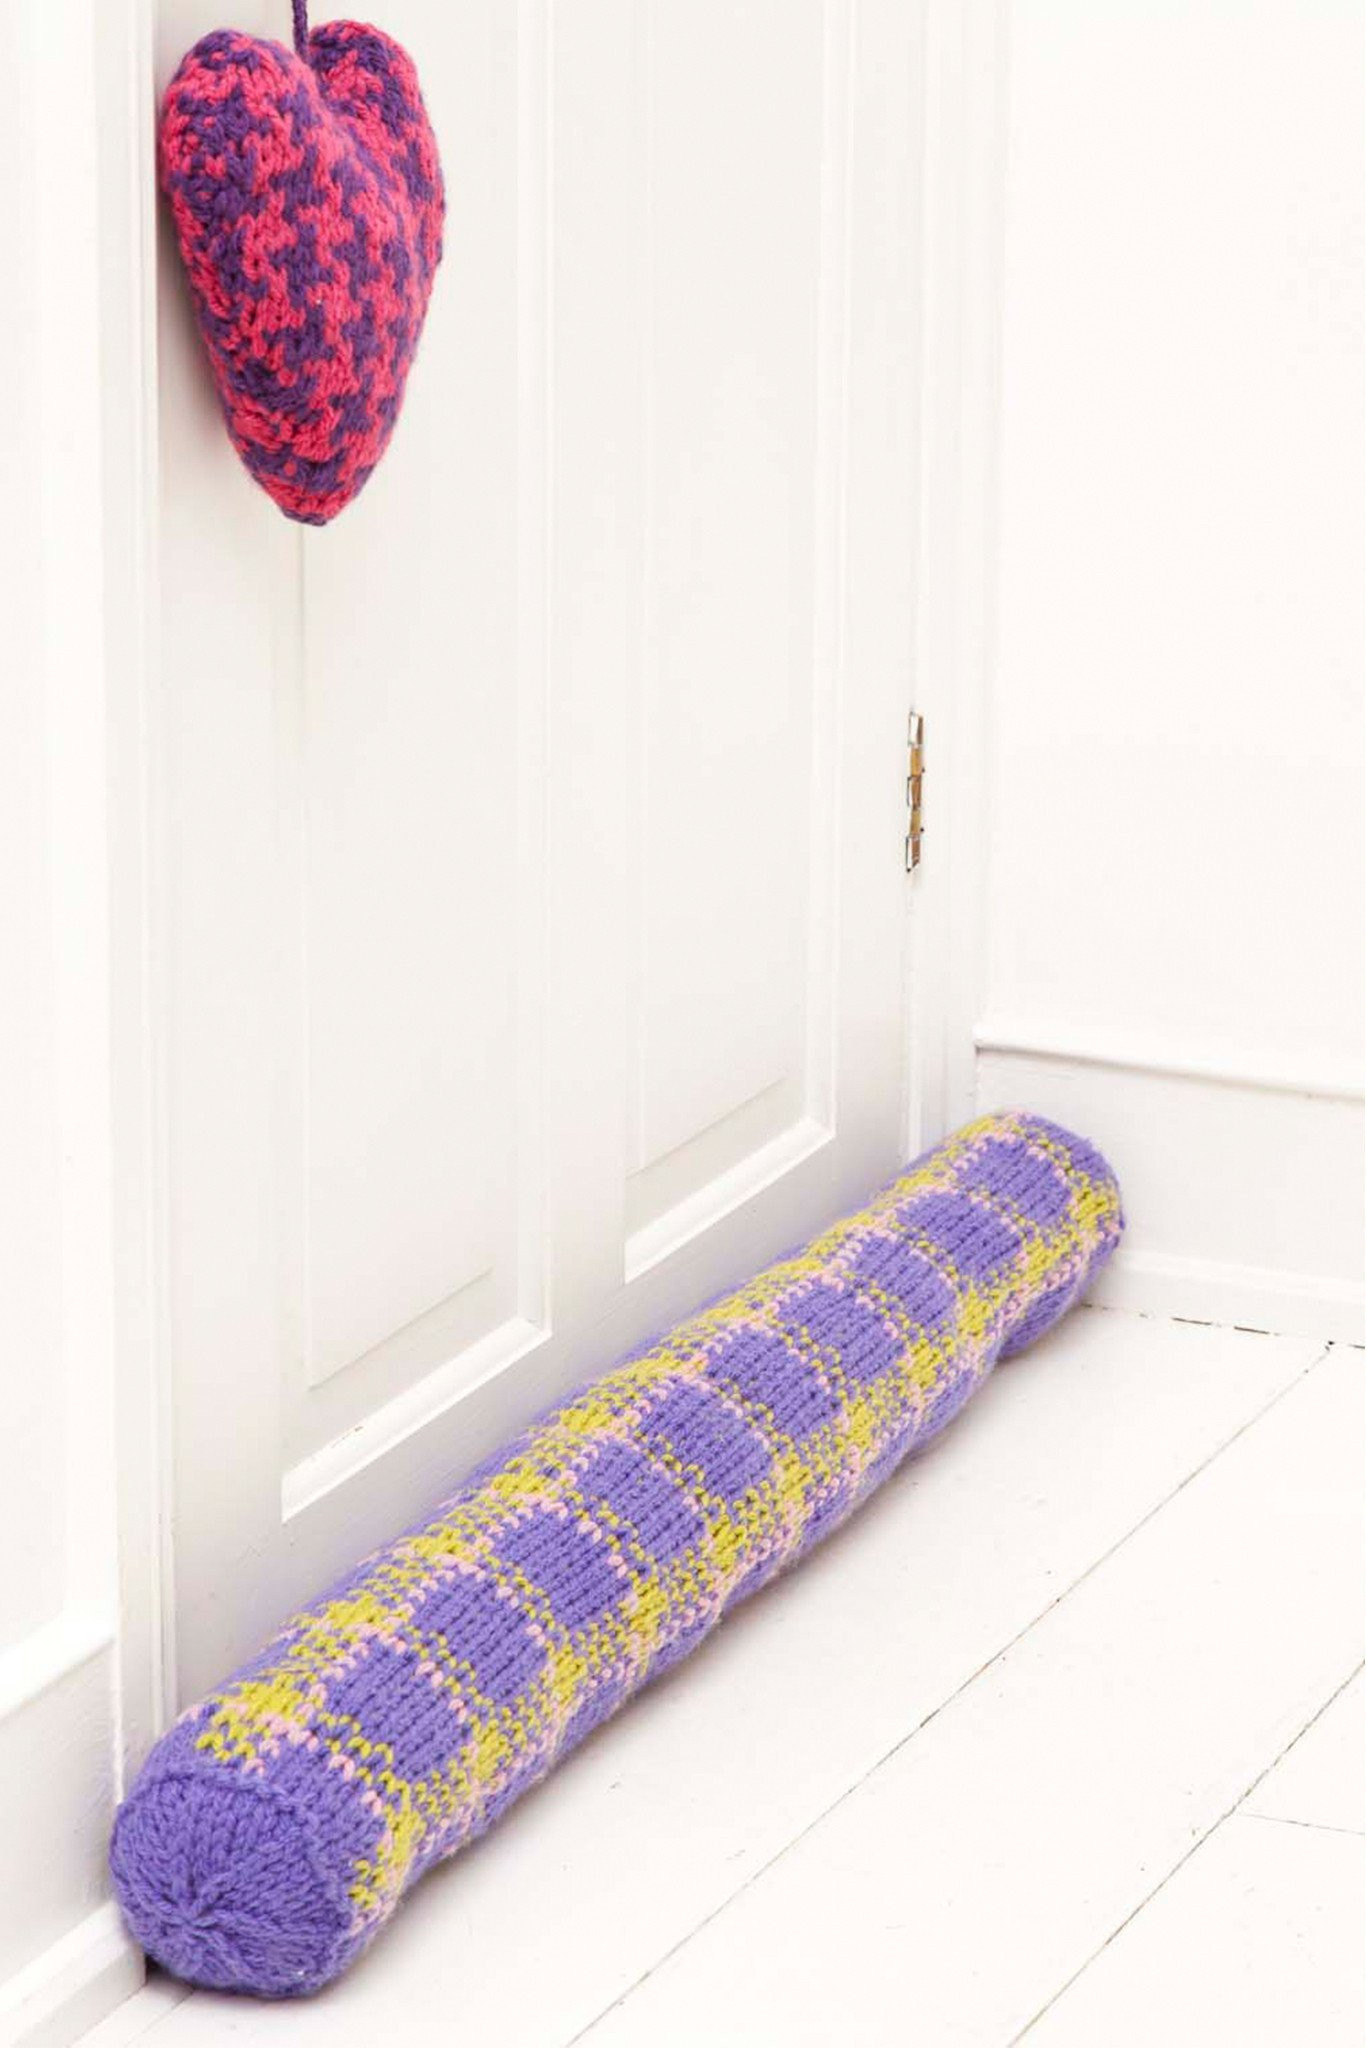 Knitted Sachet Pattern Door Stop Draught Excluder And Sachet Knitting Patterns